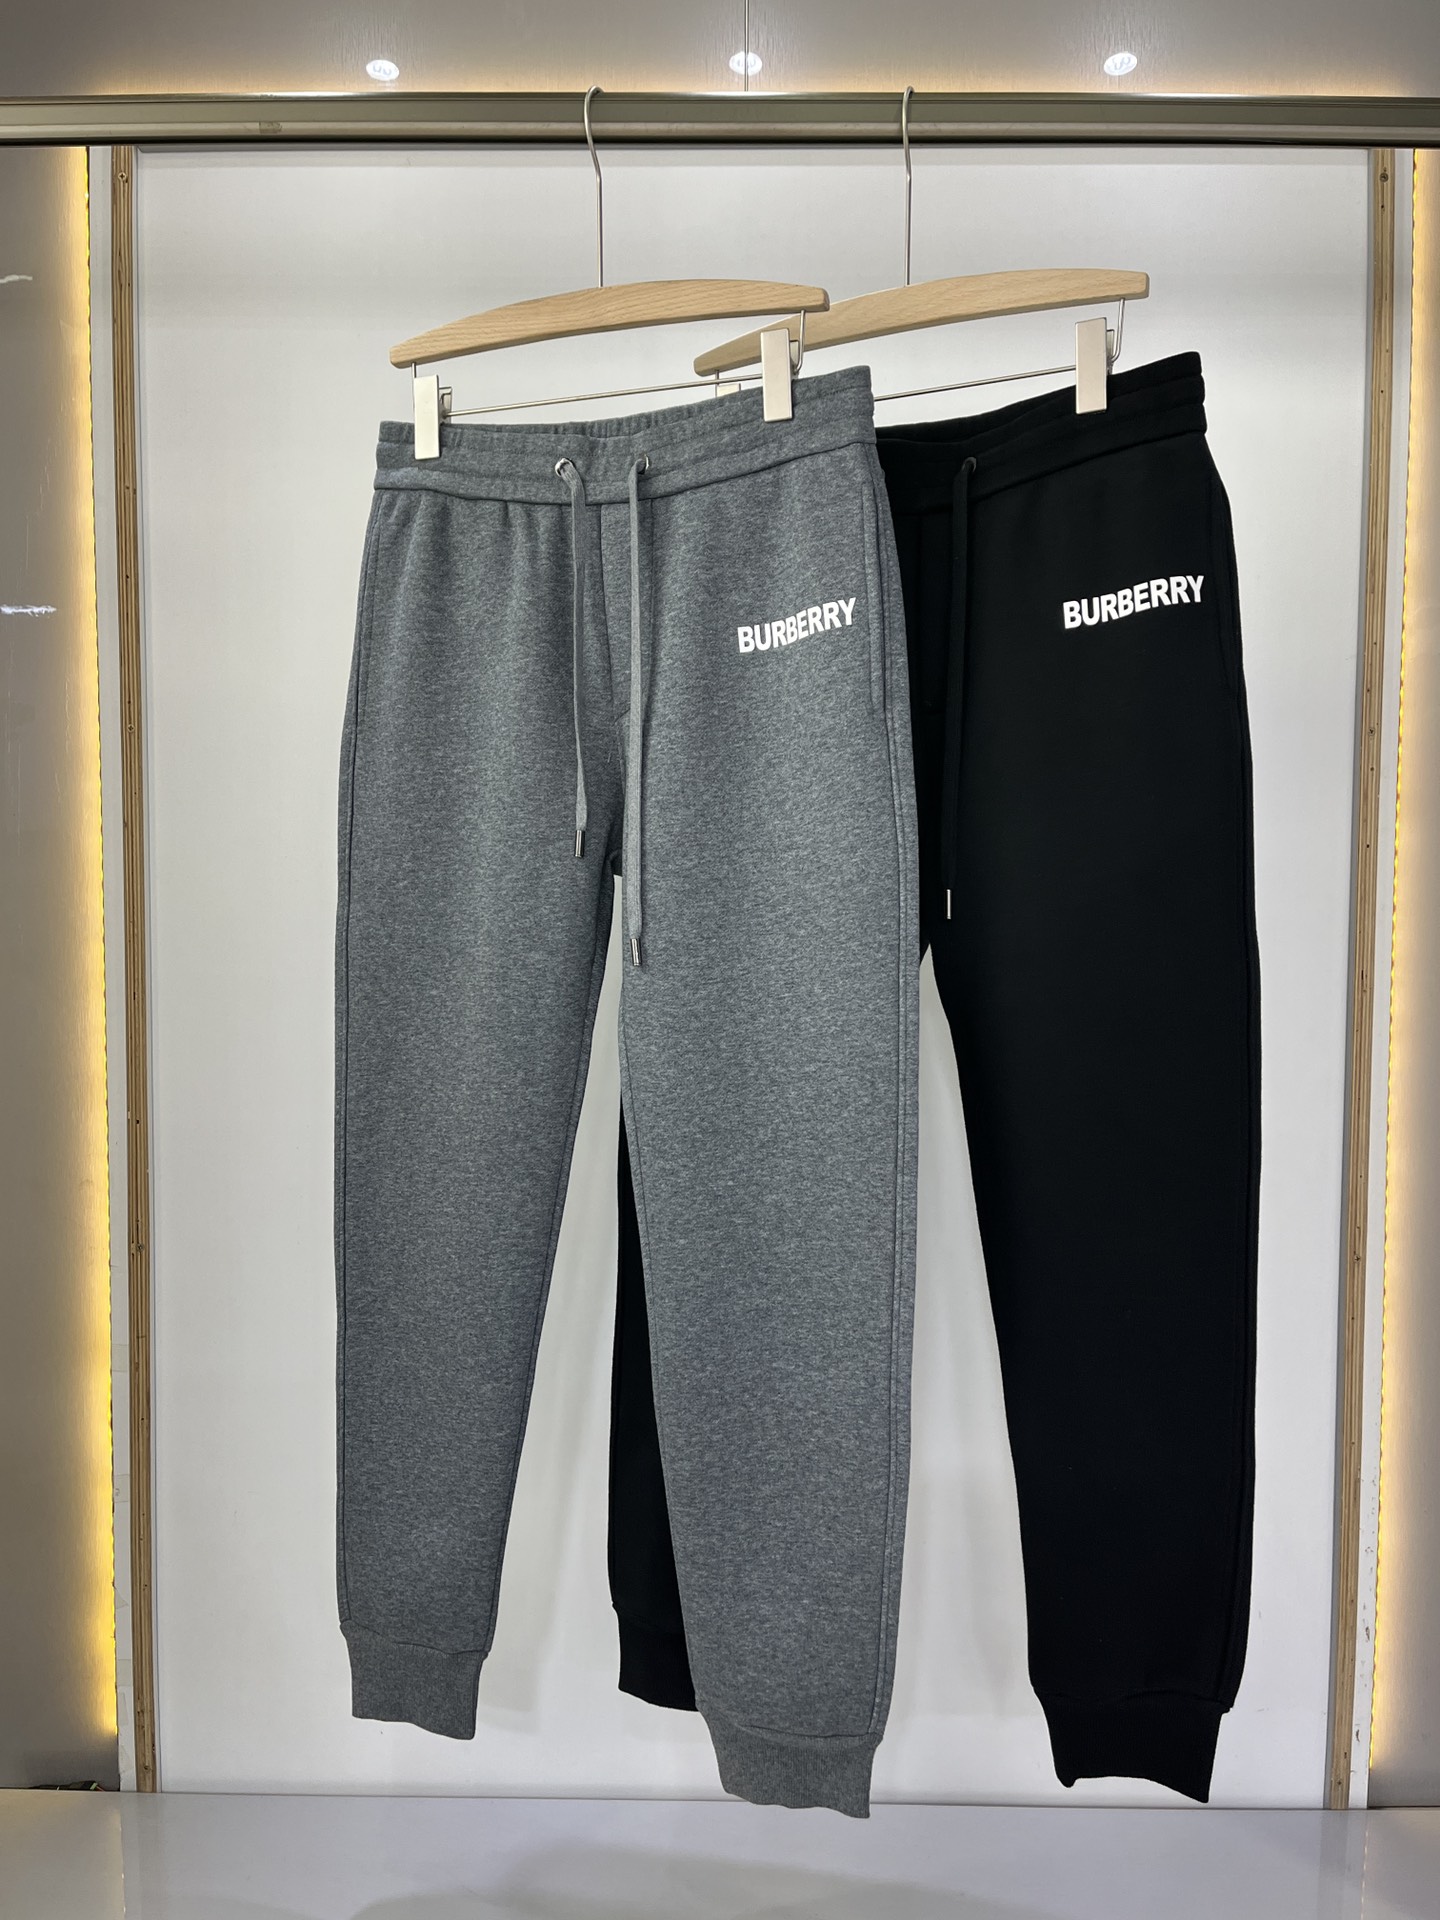 Burberry Clothing Pants & Trousers Fall/Winter Collection Fashion Sweatpants